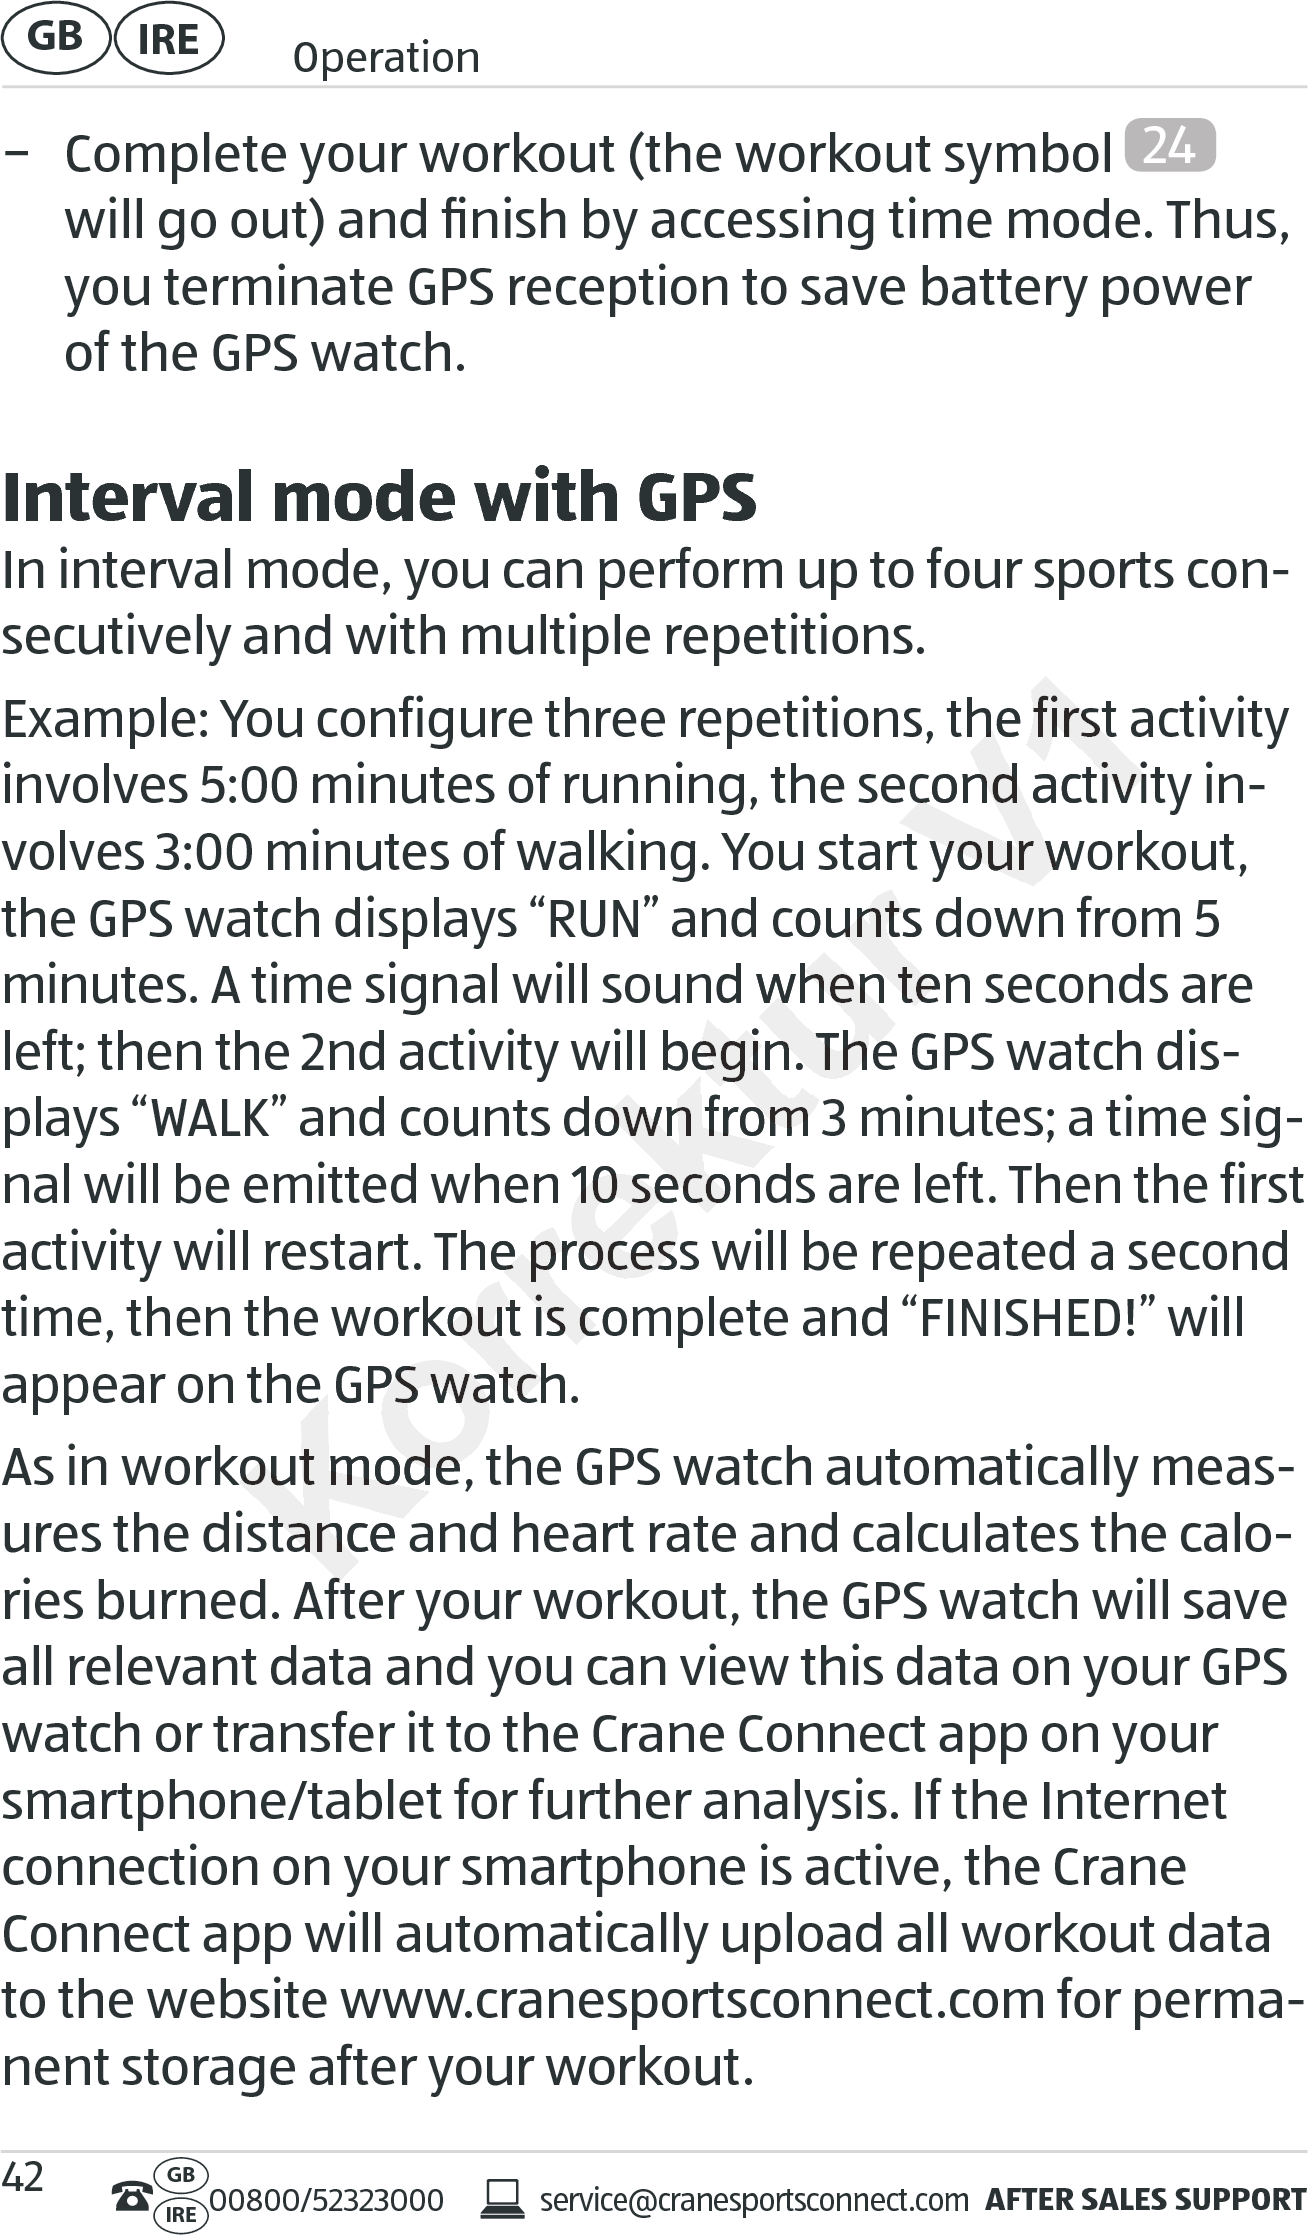 AFTER SALES SUPPORTservice@cranesportsconnect.comGBIRE 00800/52323000IRE OperationGB 42 − Complete your workout (the workout symbol  24  will go out) and ﬁnish by accessing time mode. Thus, you terminate GPS reception to save battery power of the GPS watch.Interval mode with GPSIn interval mode, you can perform up to four sports con-secutively and with multiple repetitions.Example: You configure three repetitions, the first activity involves 5:00 minutes of running, the second activity in-volves 3:00 minutes of walking. You start your workout, the GPS watch displays “RUN” and counts down from 5 minutes. A time signal will sound when ten seconds are left; then the 2nd activity will begin. The GPS watch dis-plays “WALK”and counts down from 3 minutes; a time sig-nal will be emitted when 10 seconds are left. Then the first activity will restart. The process will be repeated a second time, then the workout is complete and “FINISHED!” will appear on the GPS watch.As in workout mode, the GPS watch automatically meas-ures the distance and heart rate and calculates the calo-ries burned. After your workout, the GPS watch will save all relevant data and you can view this data on your GPS watch or transfer it to the Crane Connect app on your smartphone/tablet for further analysis. If the Internet connection on your smartphone is active, the Crane Connect app will automatically upload all workout data to the website www.cranesportsconnect.com for perma-nent storage after your workout.Korrektur volves 3:00 minutes of walking. You start your workout, the GPS watch displays “RUN” and counts down frthe GPS watch displays “RUN” and counts down frminutes. A time signal will sound when ten seconds are minutes. A time signal will sound when ten seconds are left; then the 2nd activity will begin. The GPS watch disleft; then the 2nd activity will begin. The GPS watch displays “WALK”and counts down from 3 minutes; a time sigplays “WALK”and counts down from 3 minutes; a time signal will be emitted when 10 seconds are left. Then the first nal will be emitted when 10 seconds are left. Then the first art. The process will be repeated a second art. The process will be repeated a second time, then the workout is complete and “FINISHED!” will time, then the workout is complete and “FINISHED!” will appear on the GPS watch.appear on the GPS watch.As in workout mode, the GPS watch automatically measAs in workout mode, the GPS watch automatically measures the distance and heart rate and calculates the caloures the distance and heart rate and calculates the calories burned. After your workout, the GPS watch will save ries burned. After your workout, the GPS watch will save V1Example: You configure three repetitions, the first activity Example: You configure three repetitions, the first activity involves 5:00 minutes of running, the second activity ininvolves 5:00 minutes of running, the second activity involves 3:00 minutes of walking. You start your workout, volves 3:00 minutes of walking. You start your workout, the GPS watch displays “RUN” and counts down fr